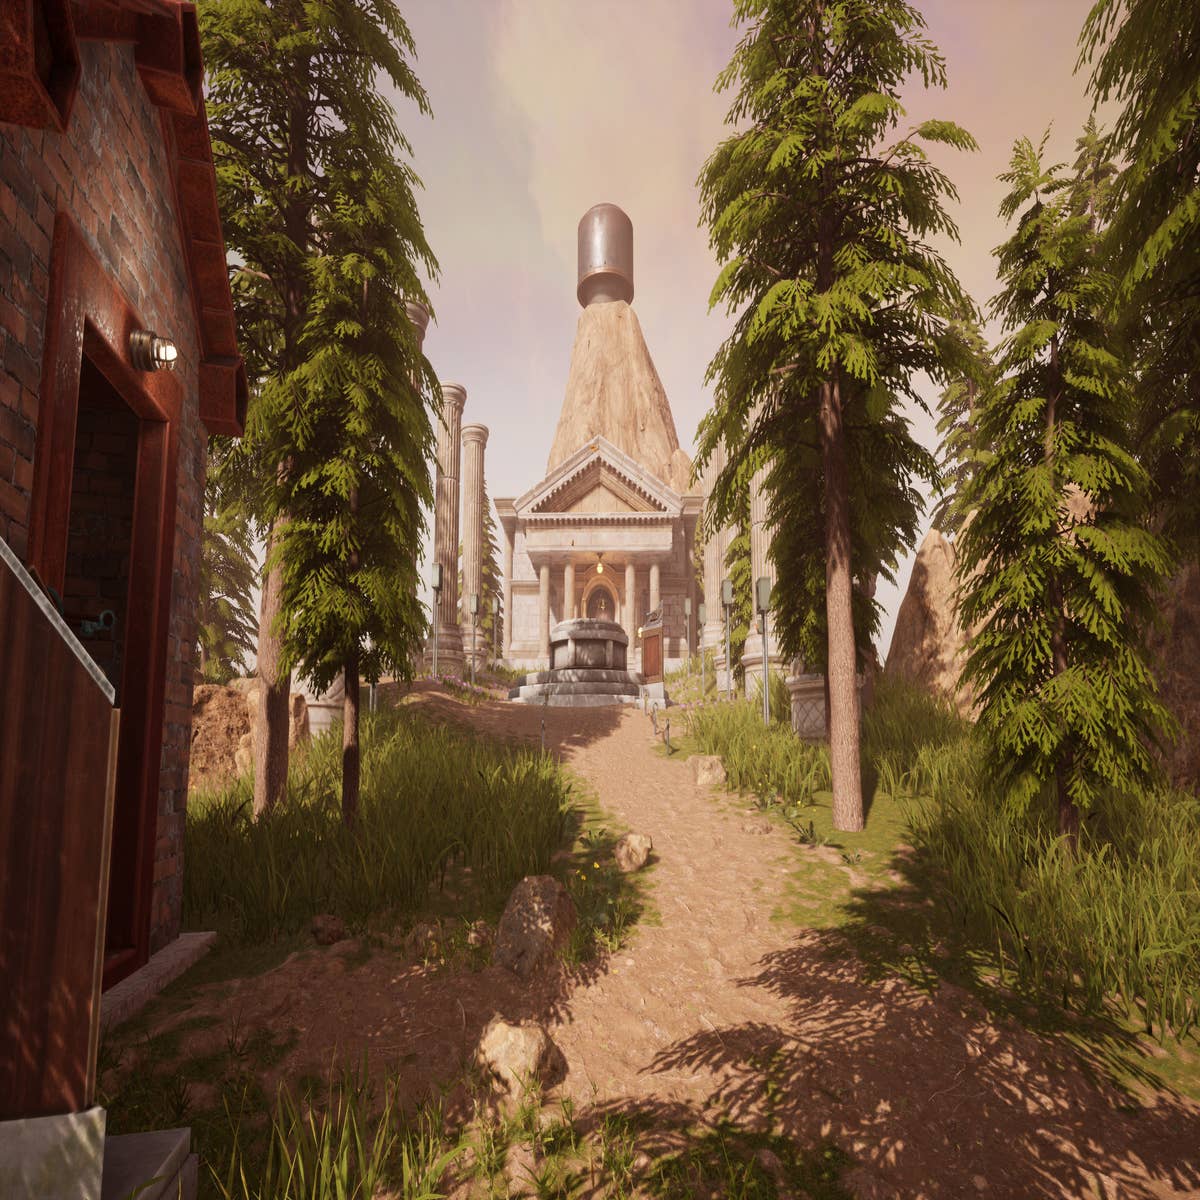 Myst FPS is a hilarious dig at the classic adventure game, and it's free on  Itch.io